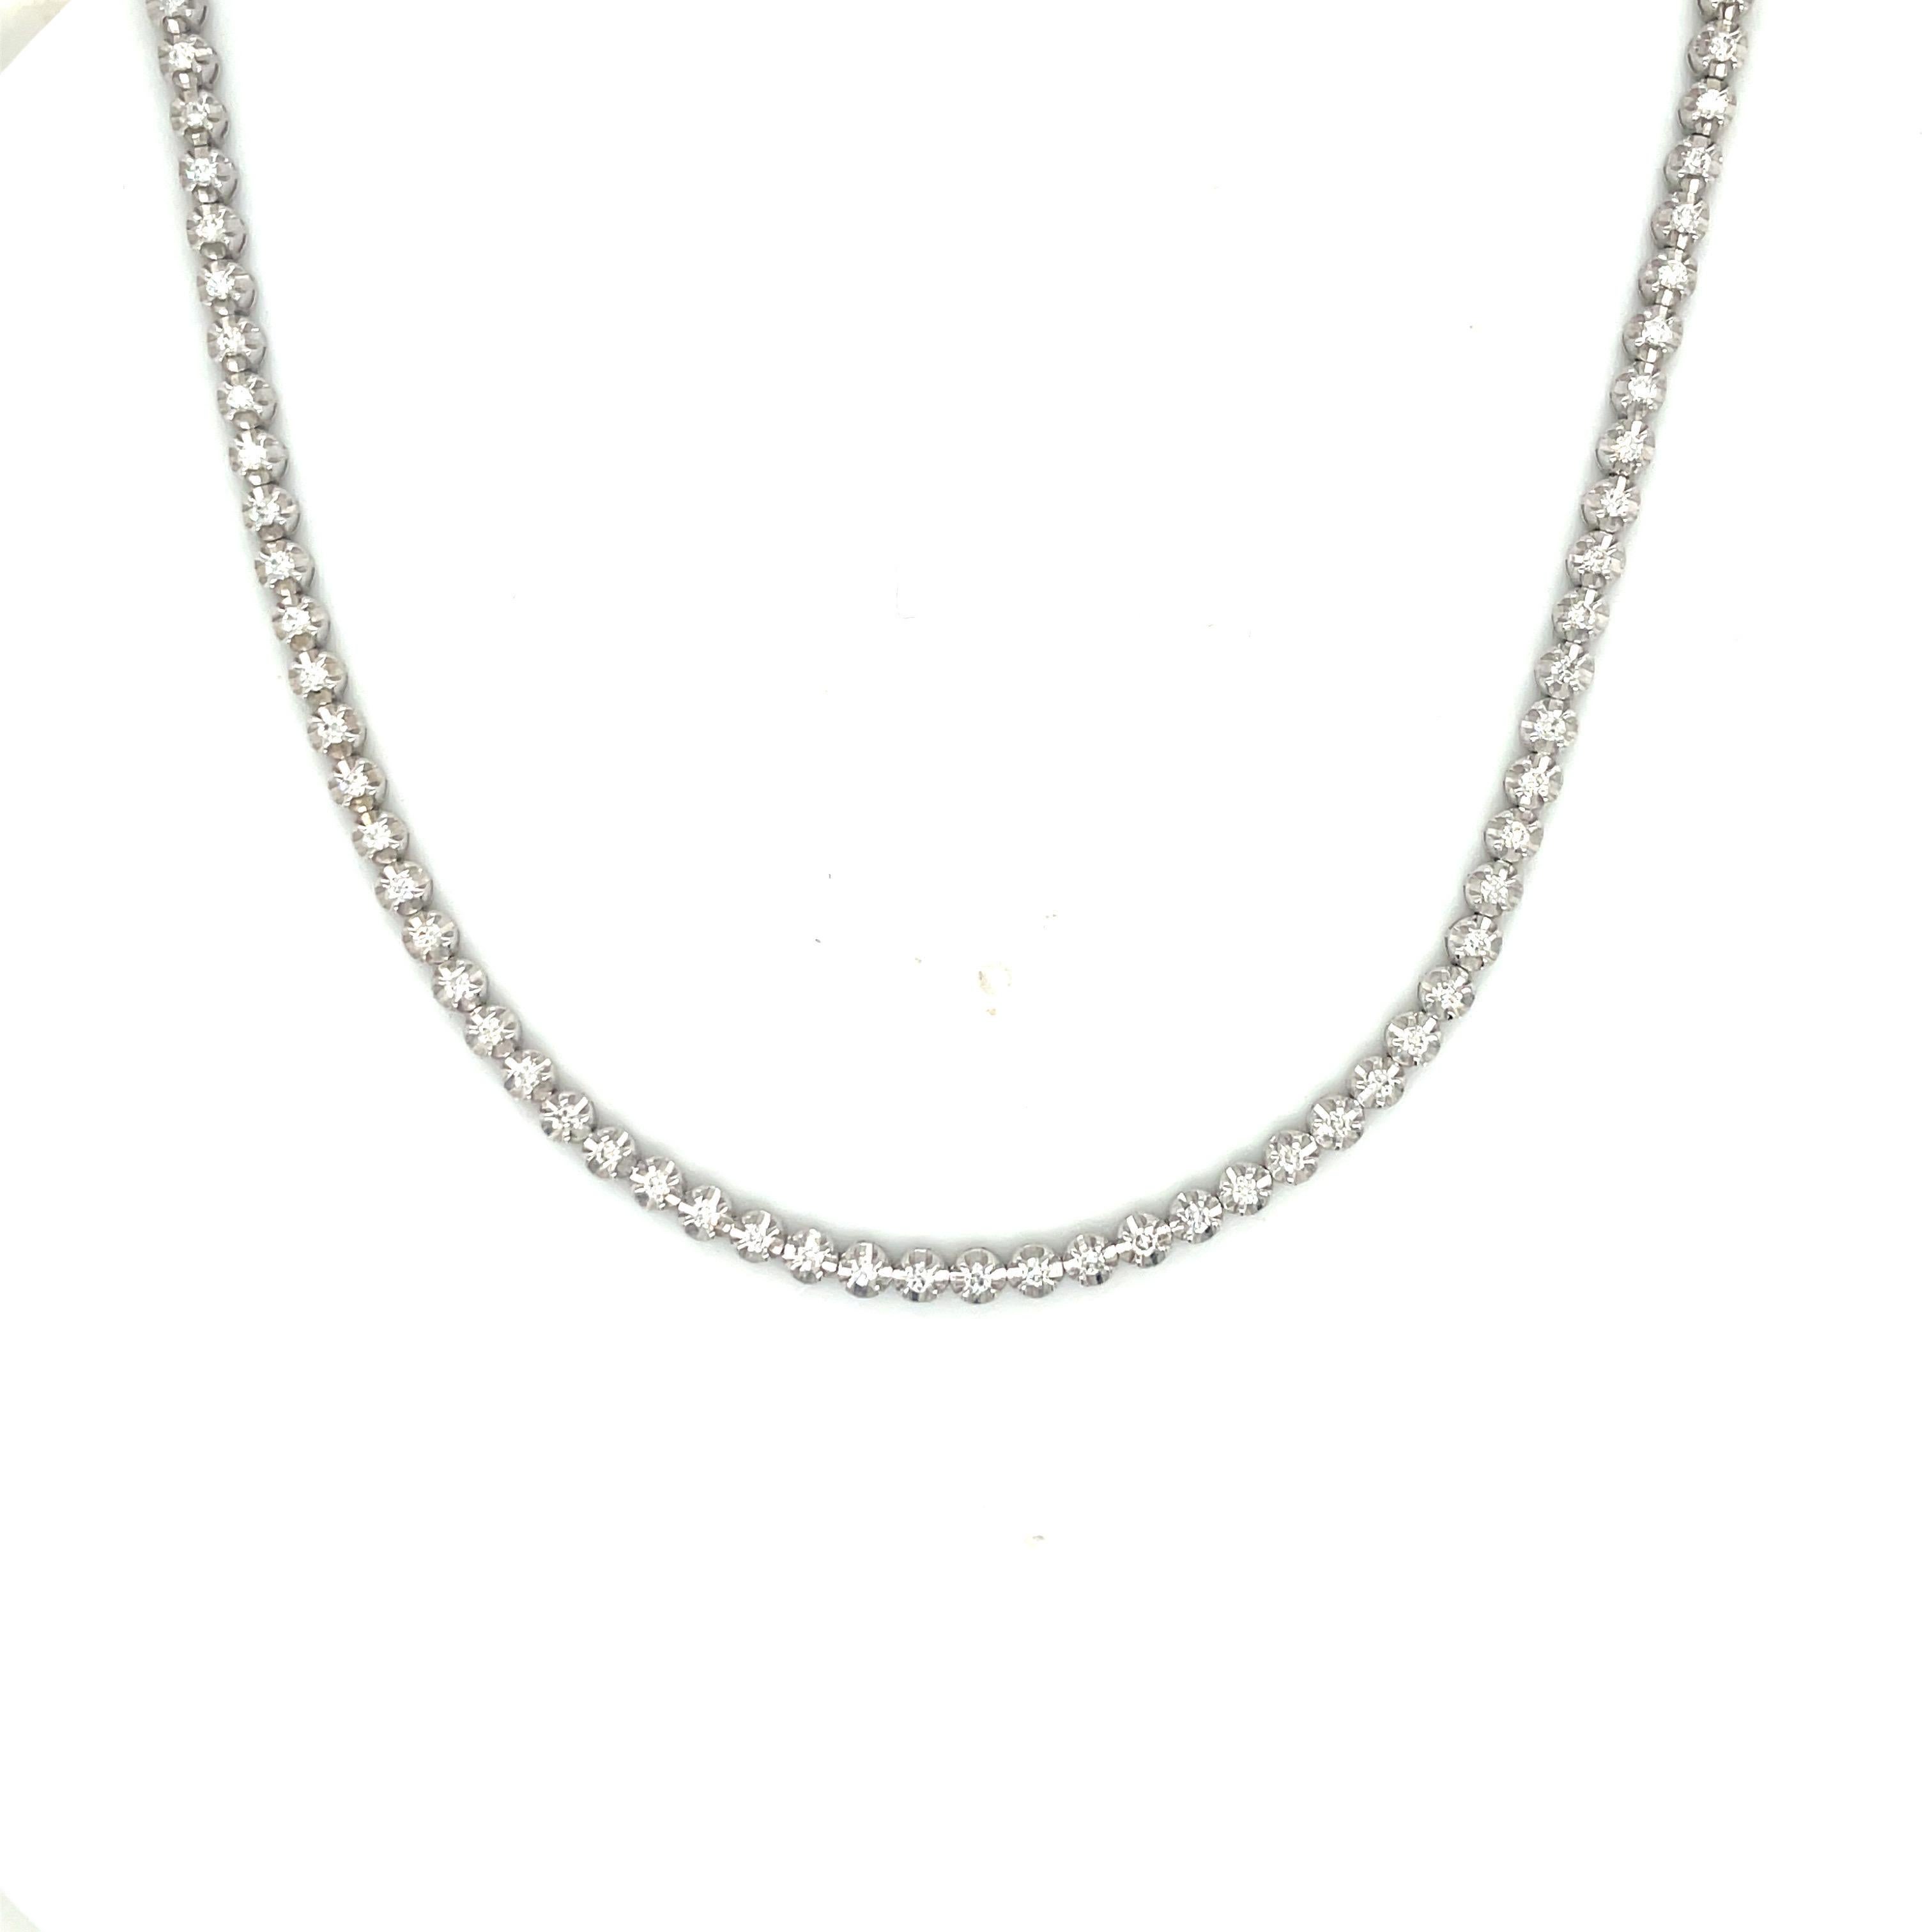 14 Karat White gold tennis necklace featuring 73 round brilliants weighing 1.03 carats in an illusion setting.
Color G-H
Clarity SI

Total length: 14.5 Inches
Diamond Length: 9 Inches
Chain Length: 5.5 Inches
Can be wrapped around the wrist twice as